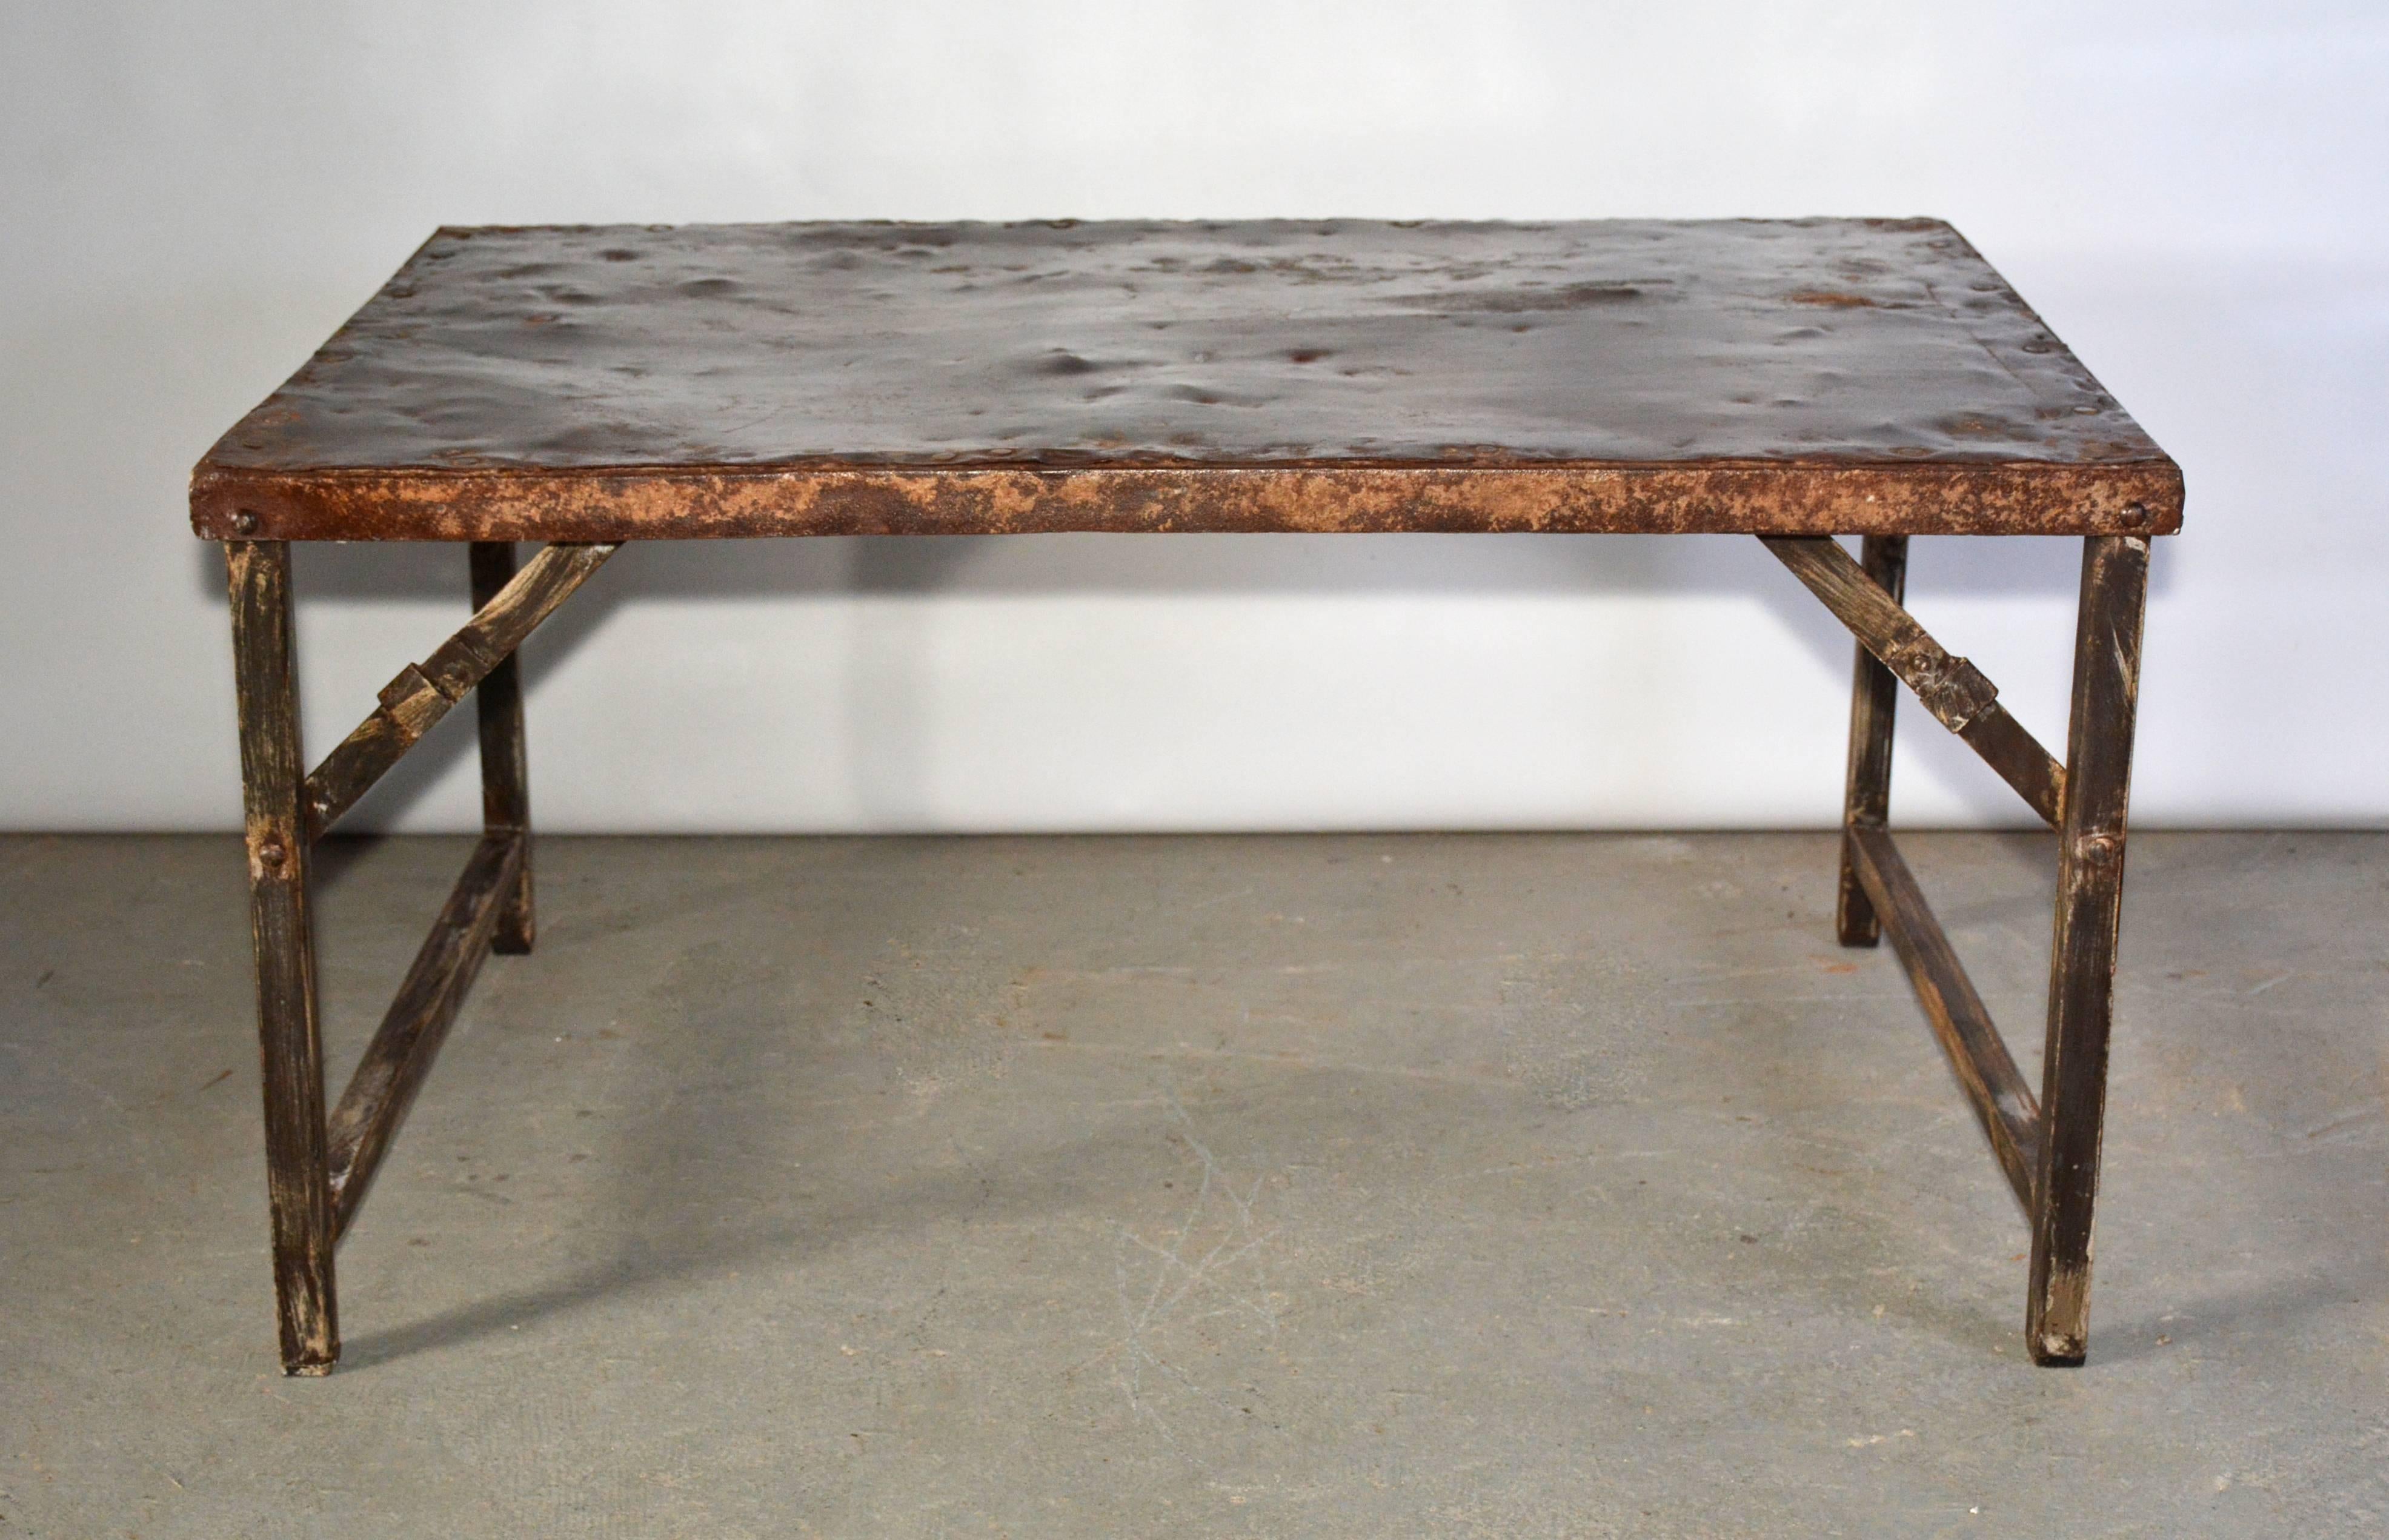 Rustic Industrial iron coffee table can be used indoor or outdoor.